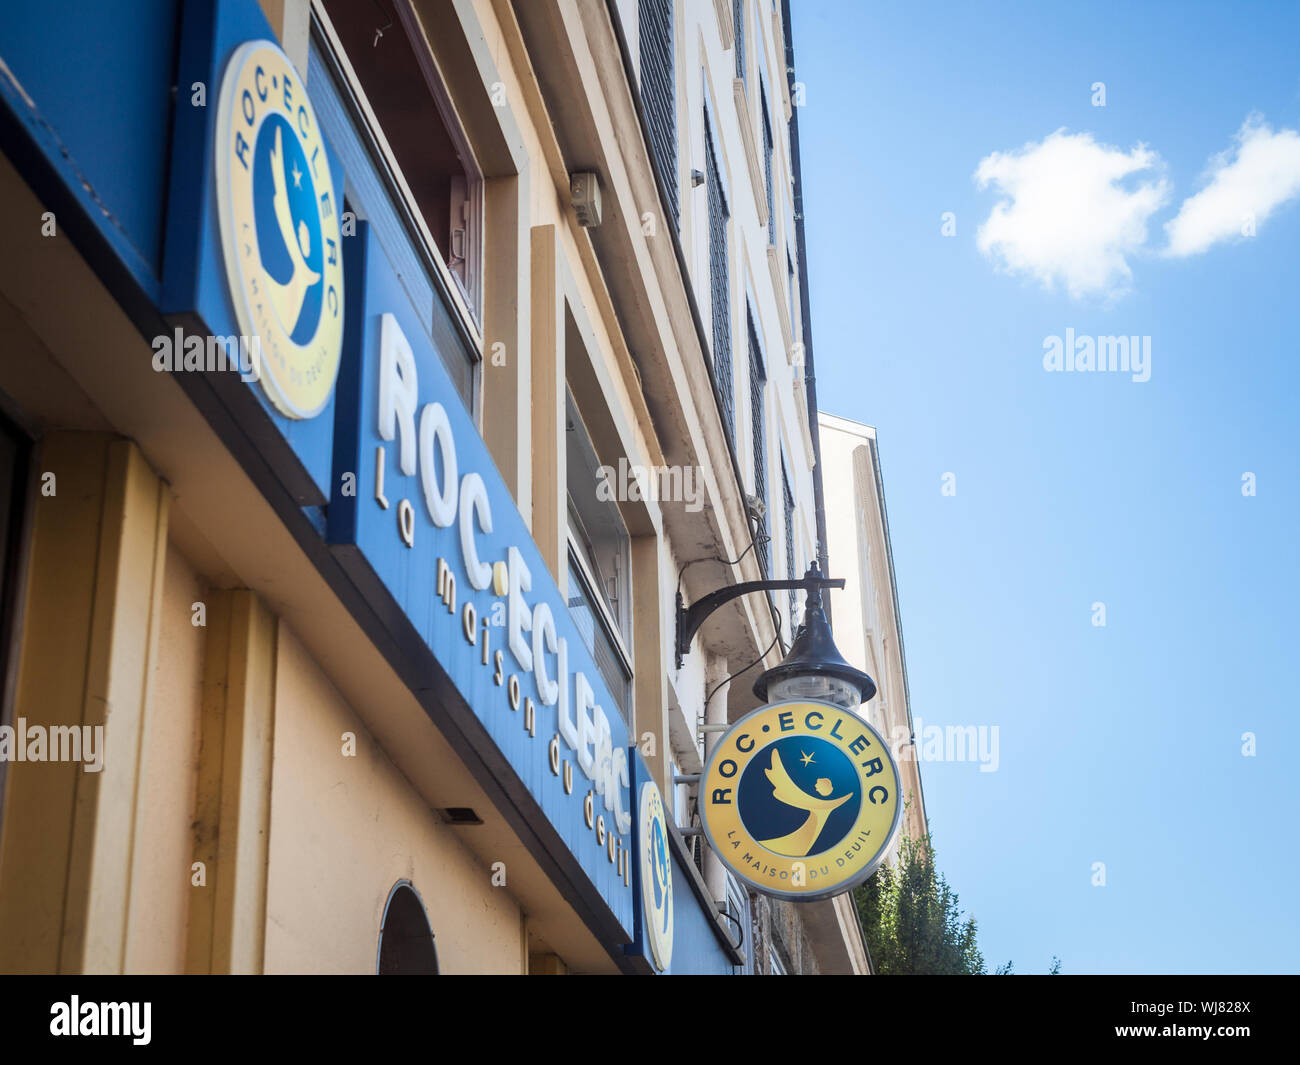 LYON, FRANCE - JULY 17, 2019: Roc Eclerc Logo in front of their local agency in Lyon. Roc Eclerc, is a French Undertaker and mortician spread in Franc Stock Photo